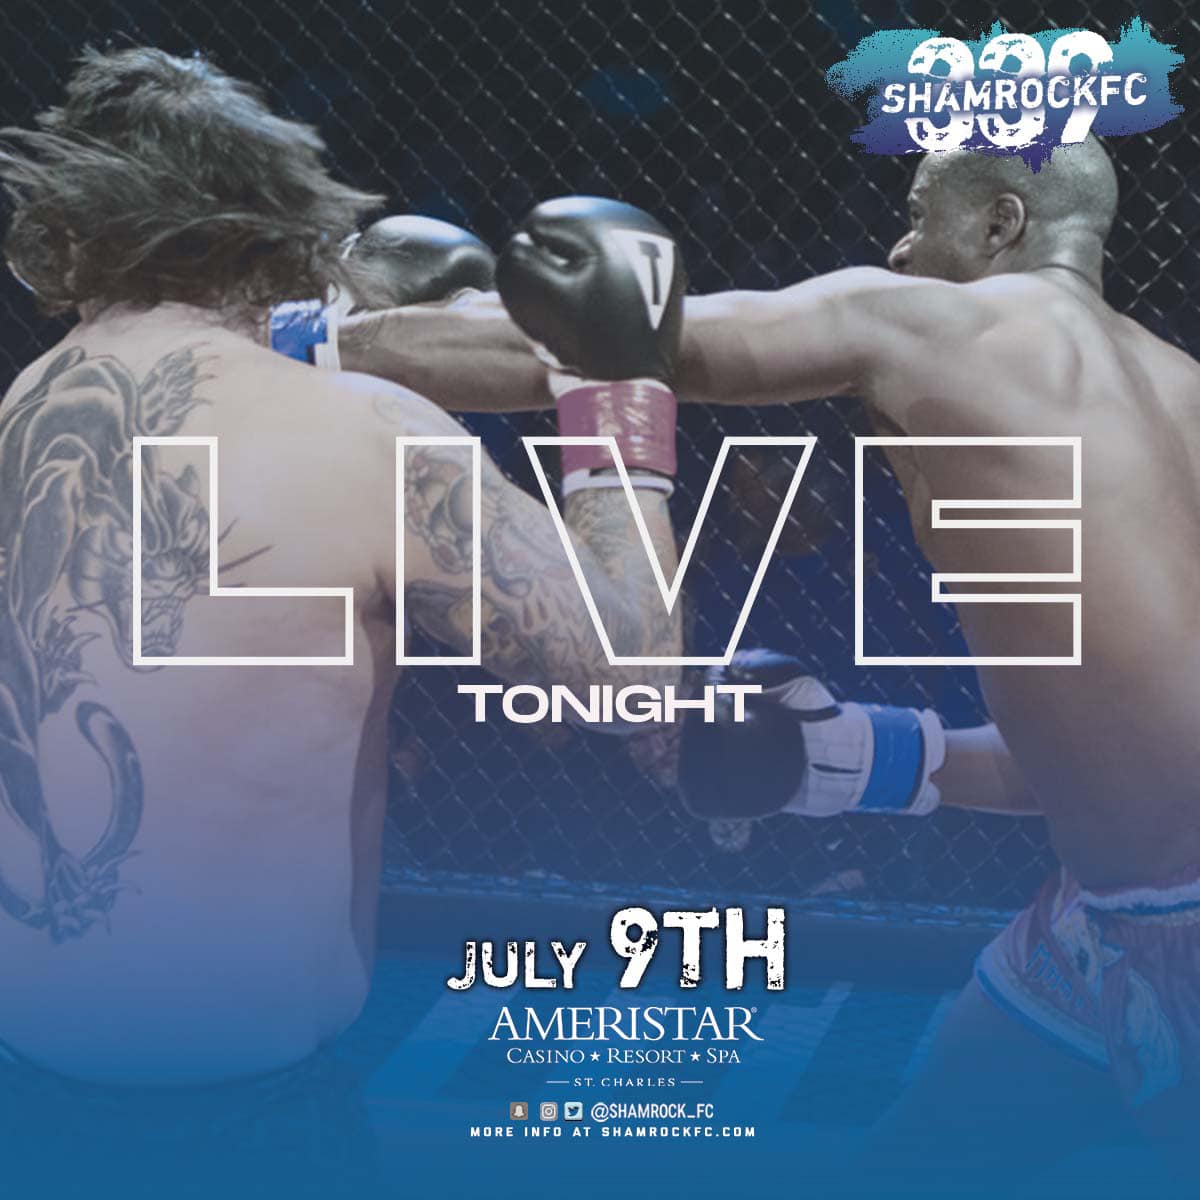 🚧⚠️THERE ARE ONLY A COUPLE OF HOURS LEFT!

#ShamrockFC339 is 𝐒𝐎𝐋𝐃 𝐎𝐔𝐓👀

Watch @Scrappy135mma and Brandon Ball battle it out for the featherweight title in the main event.

Streaming LIVE from St Charles, Missouri on #FITE📌

👉 bit.ly/3nR9UoY